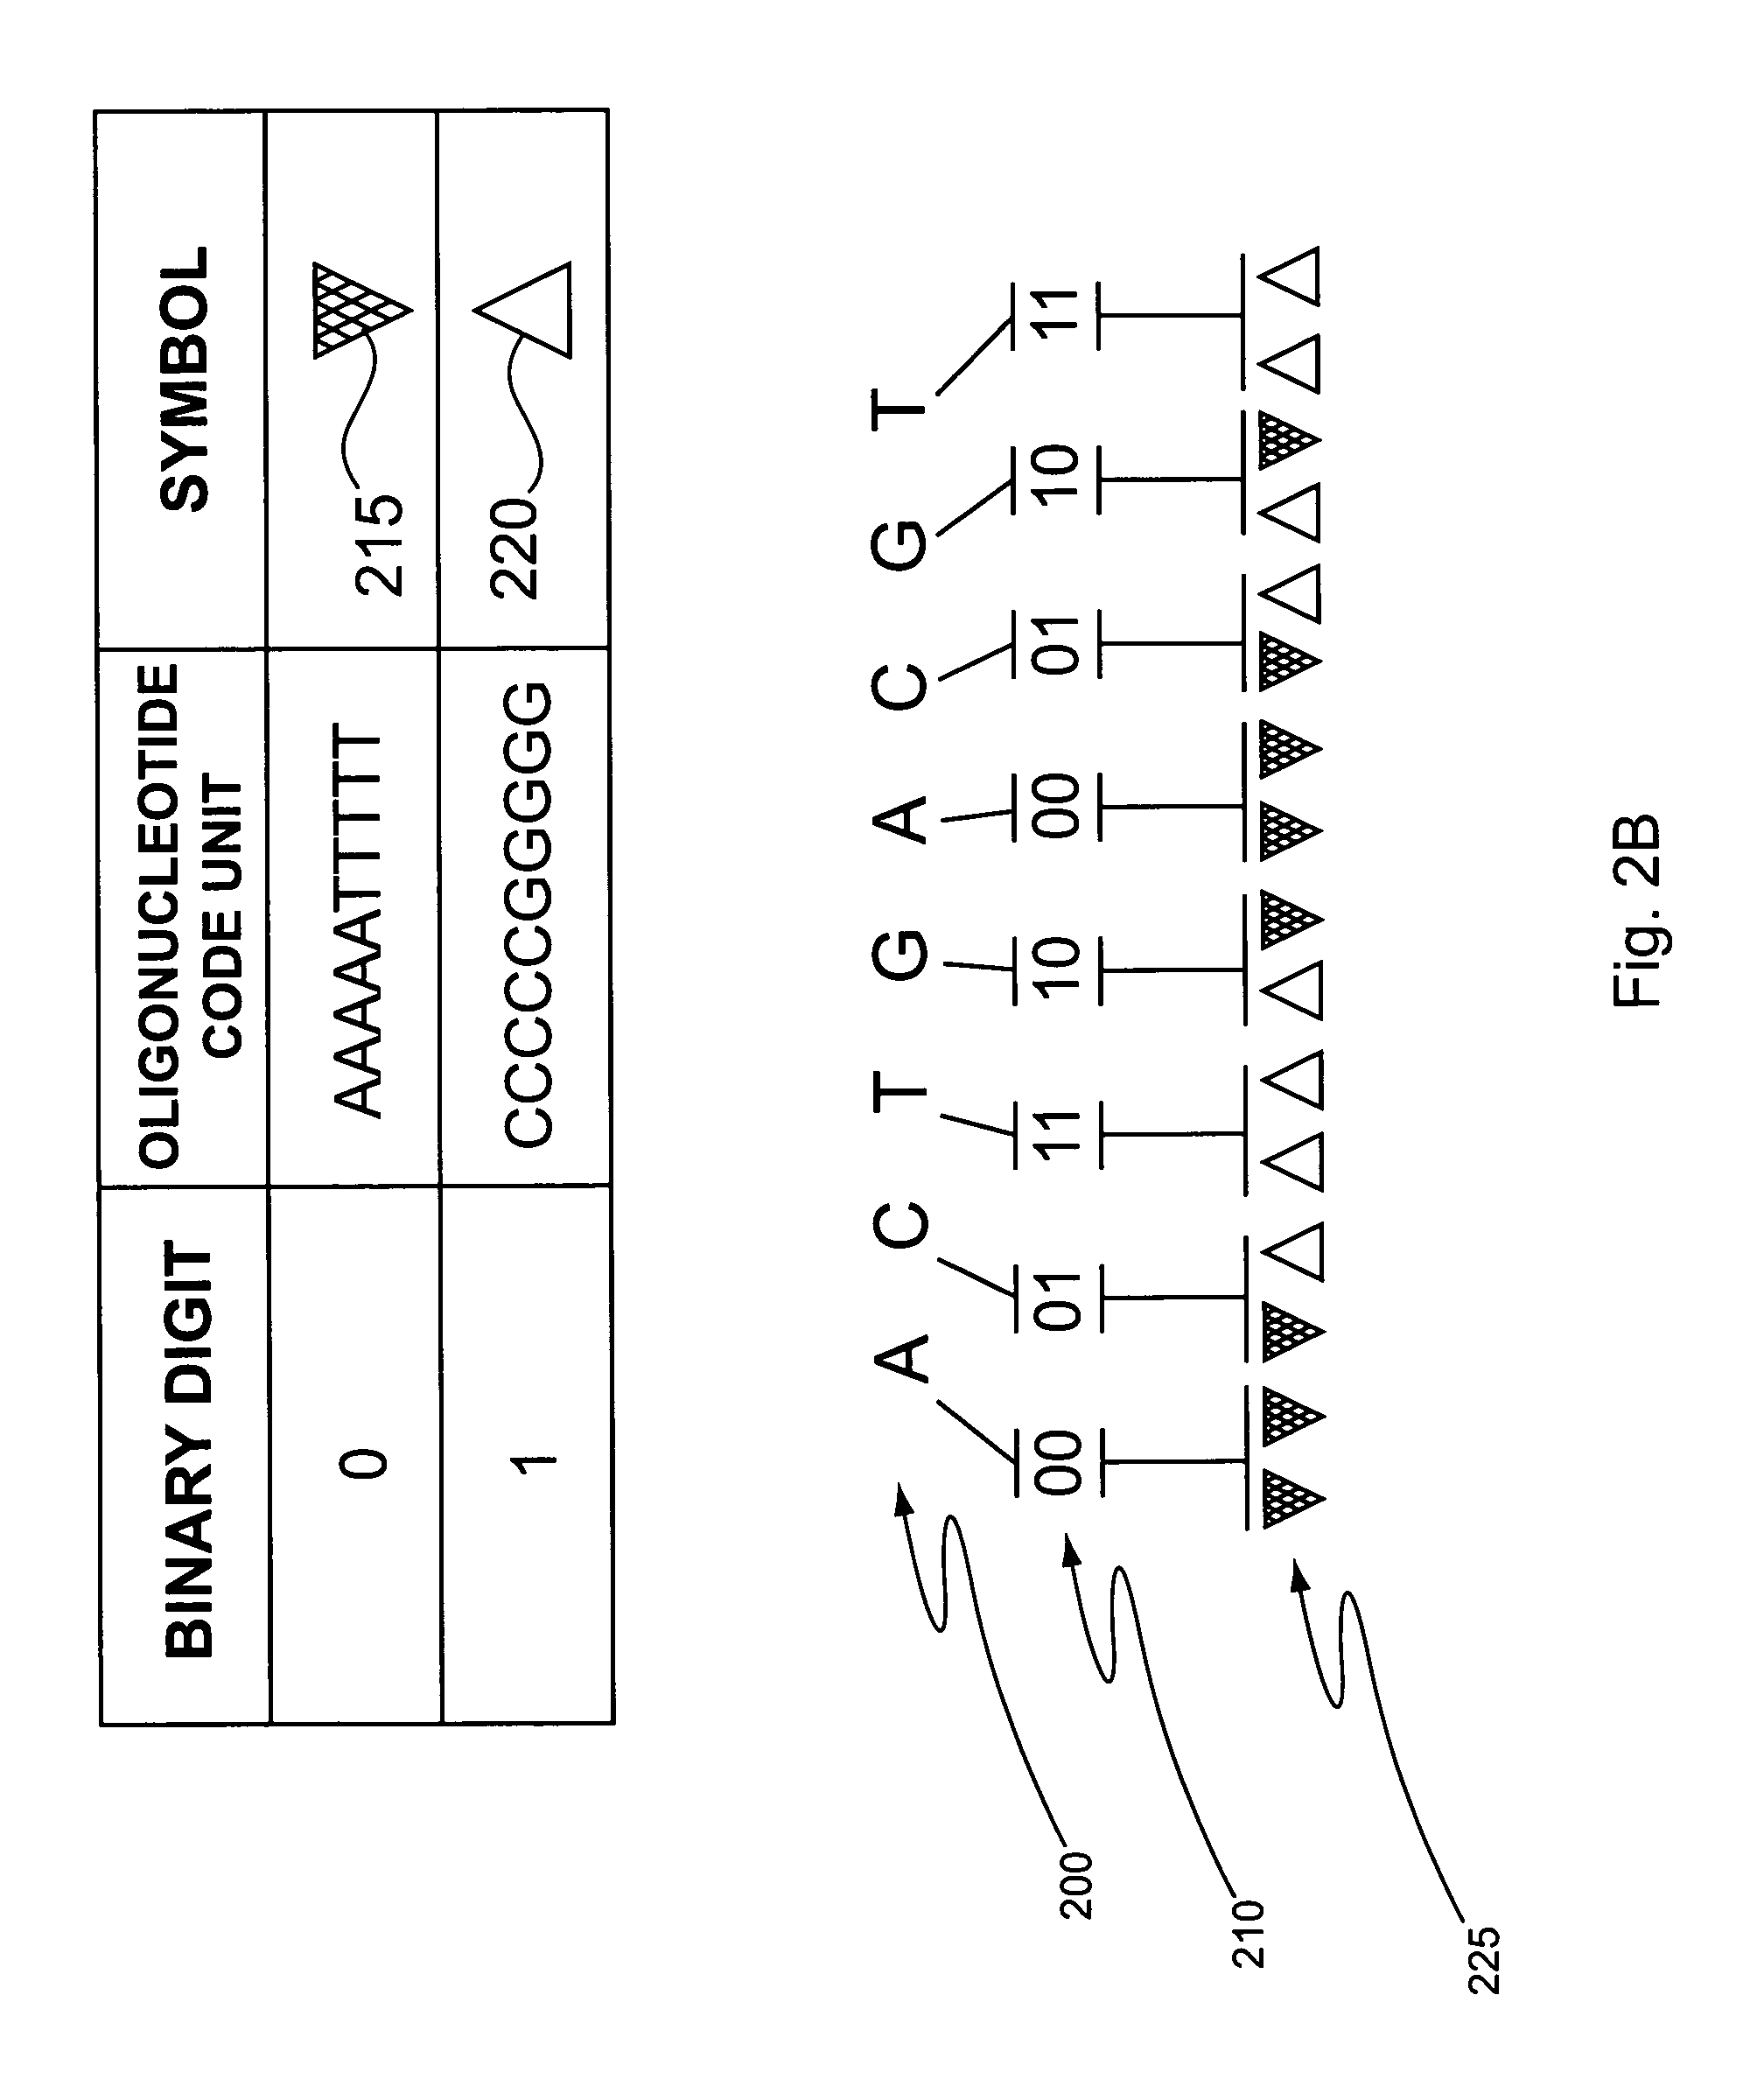 Helicase-assisted sequencing with molecular beacons